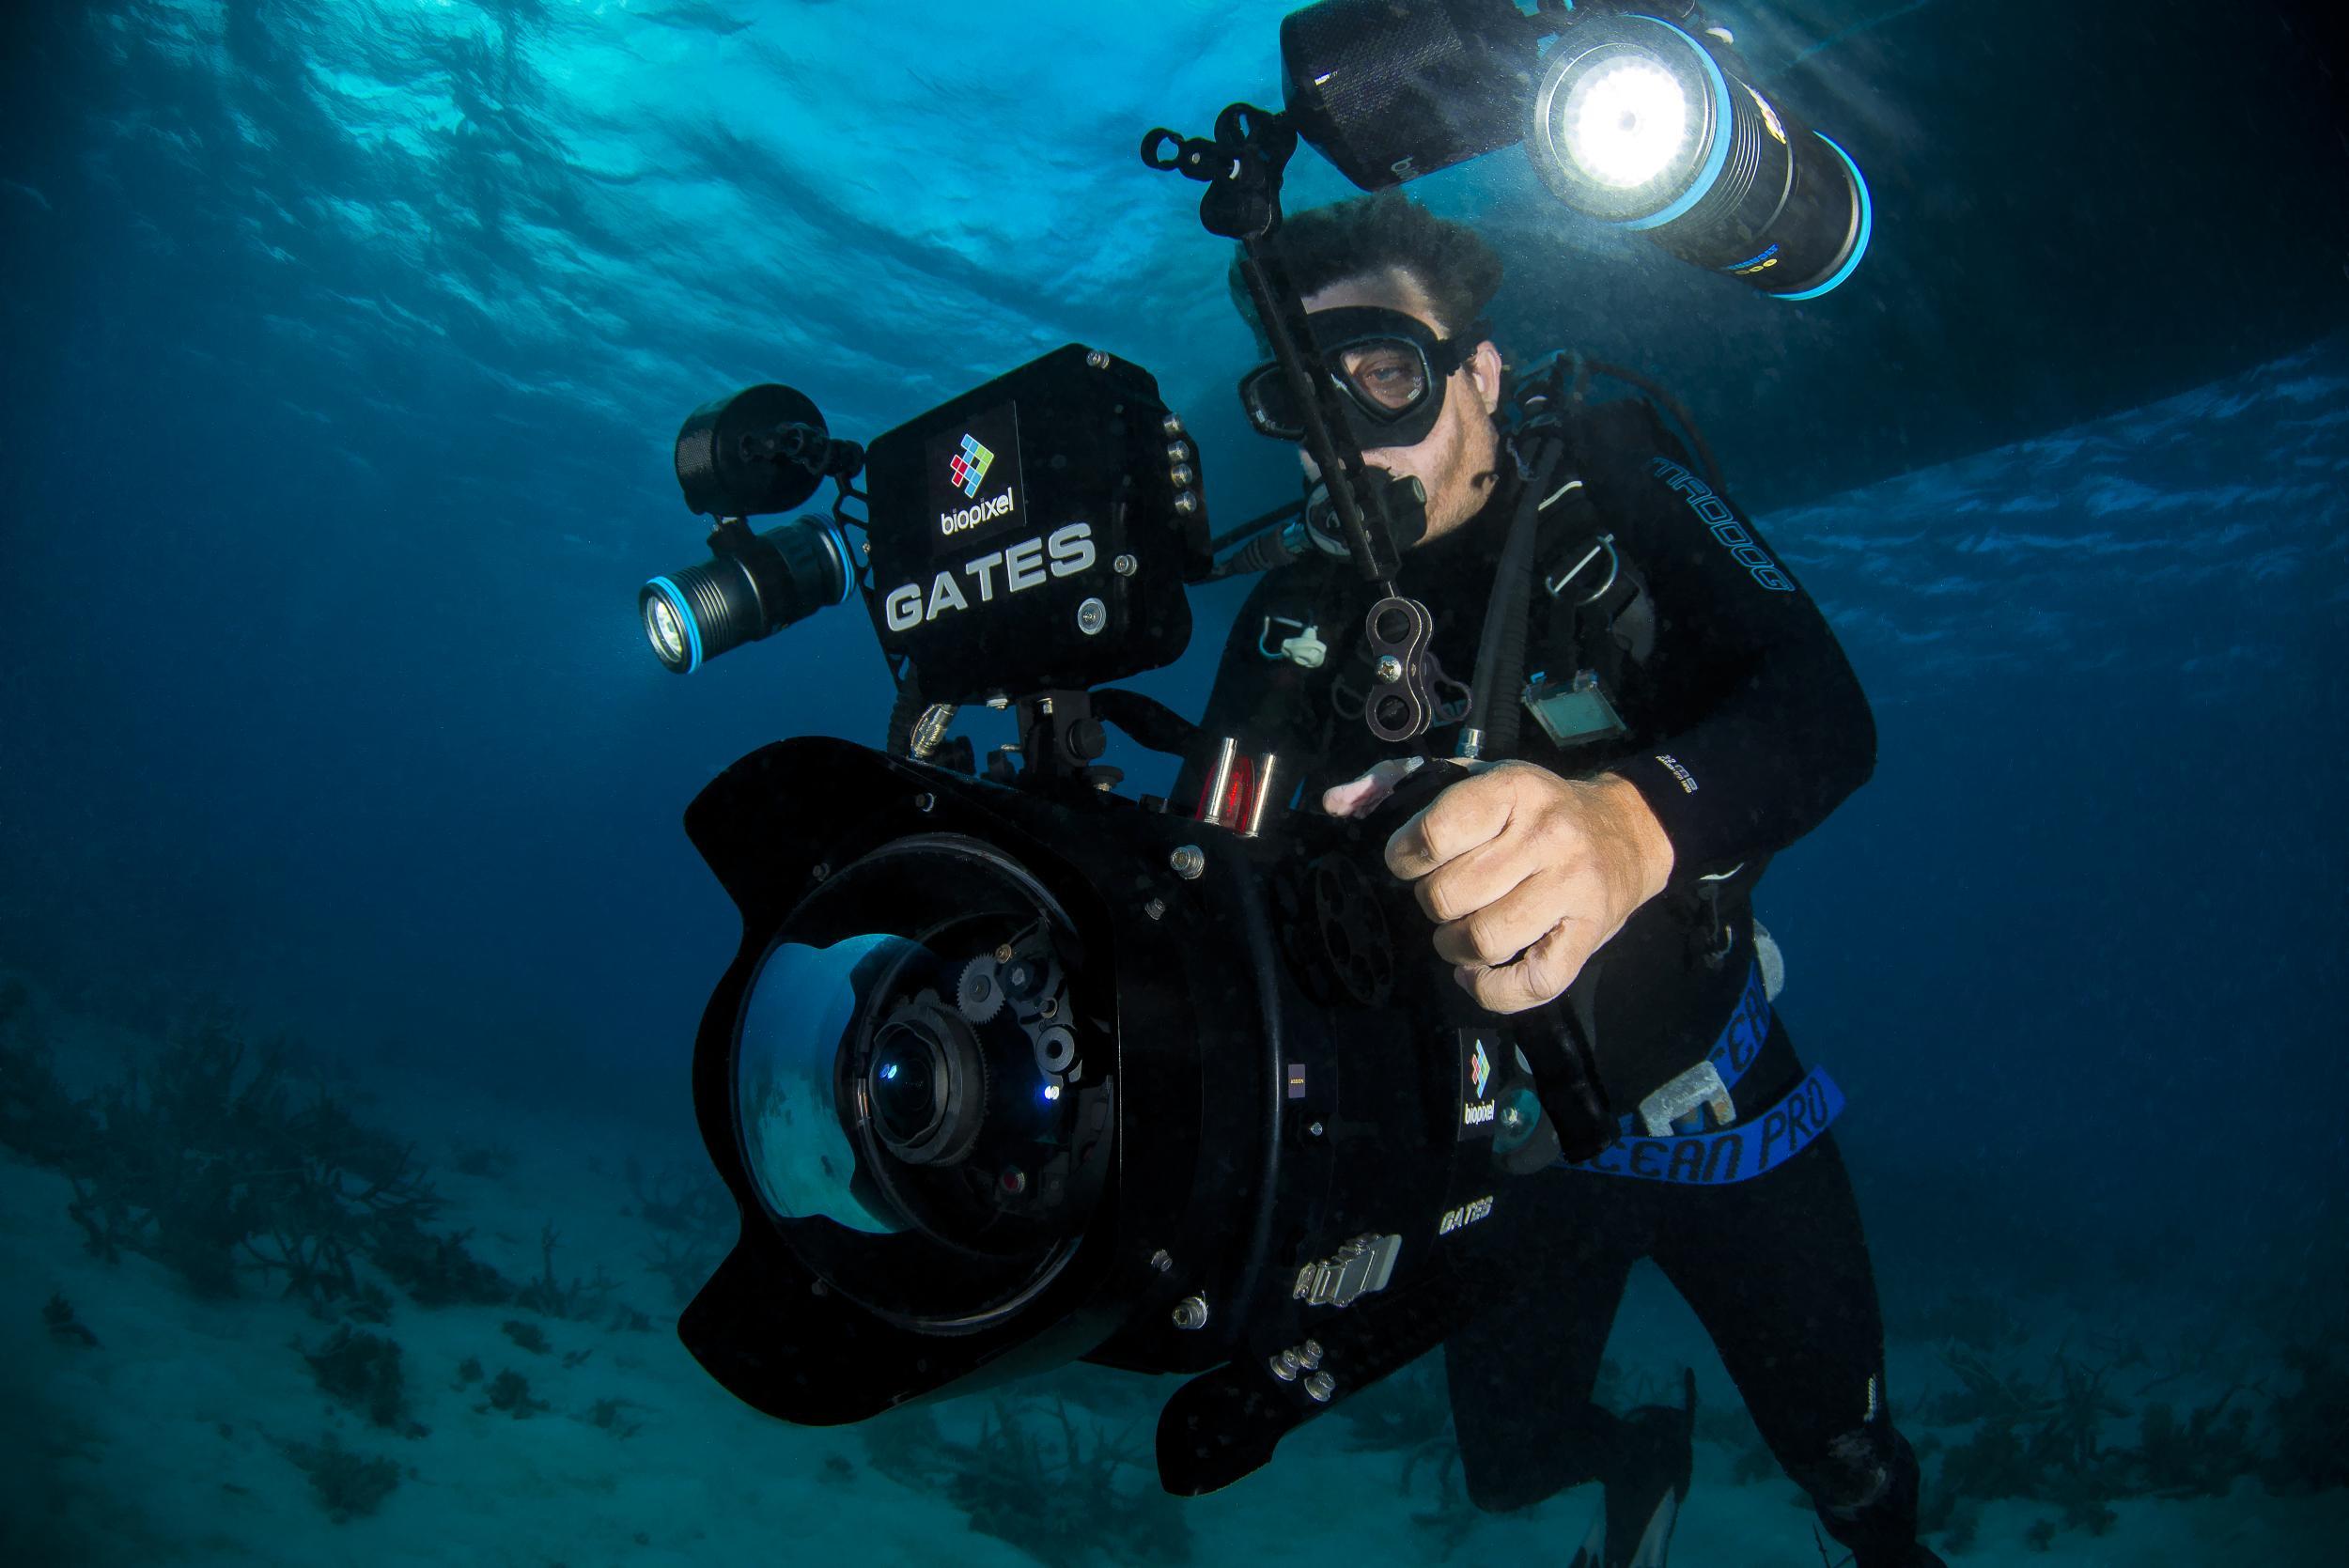 Richard Fitzpatrick has been documenting the reef since 1992